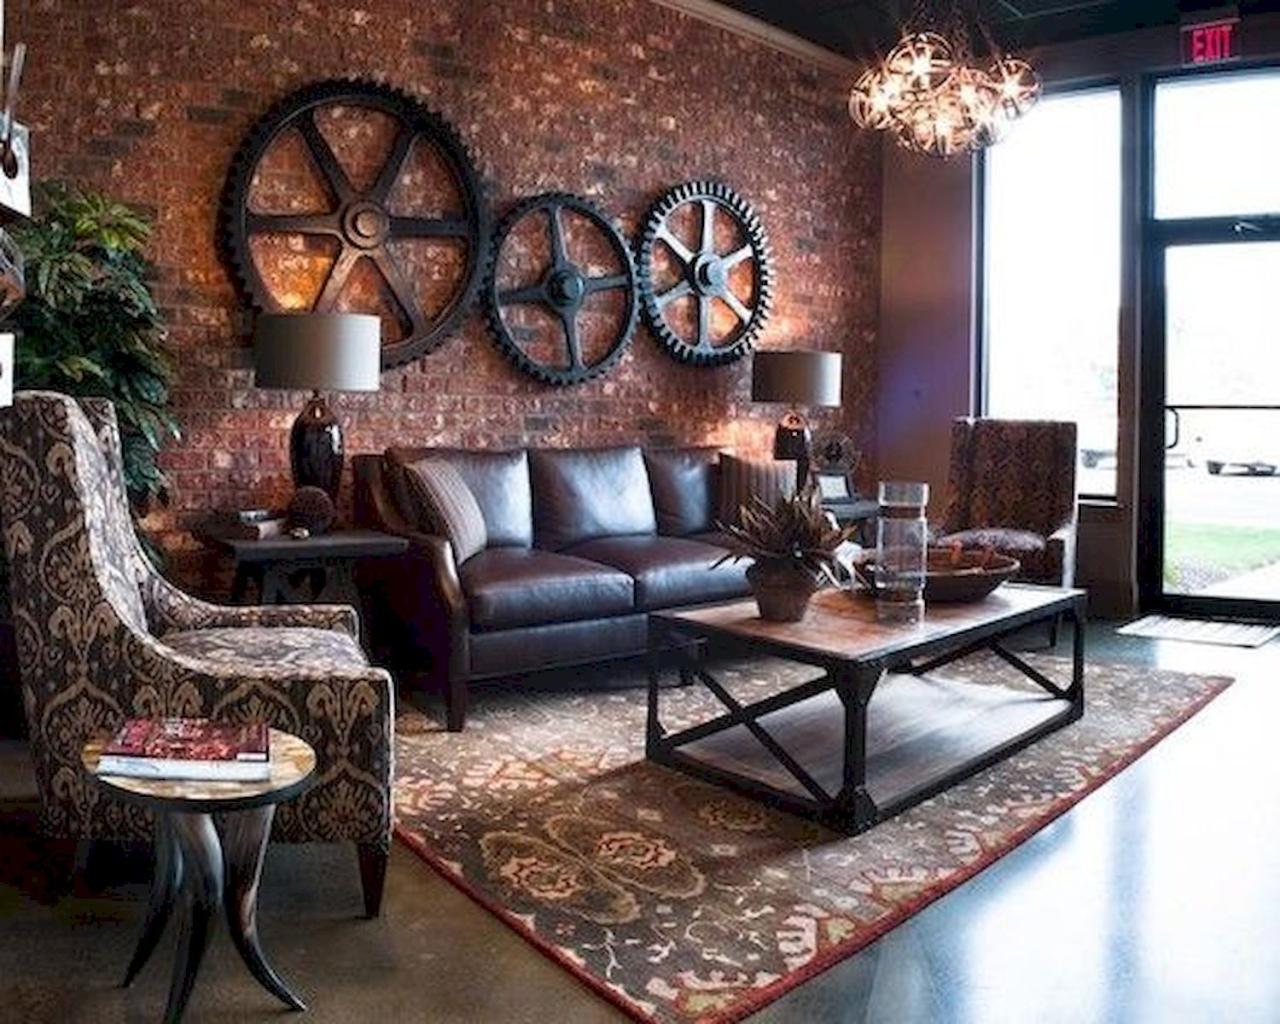 Industrial Chic: Warehouse-Inspired Living Room Design Ideas